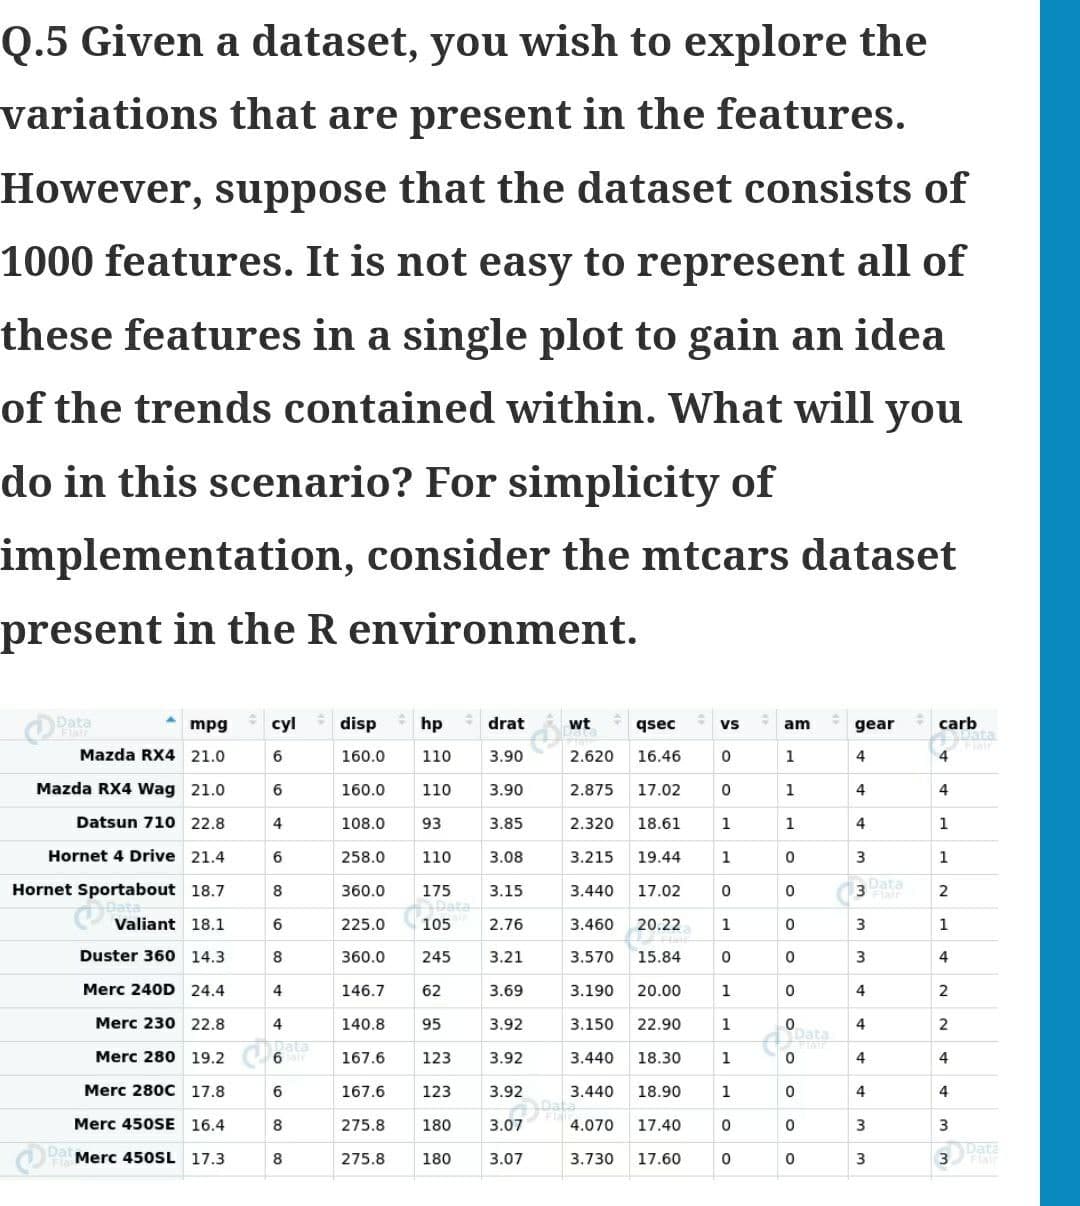 Q.5 Given a dataset, you wish to explore the
variations that are present in the features.
However, suppose that the dataset consists of
1000 features. It is not easy to represent all of
these features in a single plot to gain an idea
of the trends contained within. What will you
do in this scenario? For simplicity of
implementation, consider the mtcars dataset
present in the R environment.
Đata
mpg
cyl
disp
hp
drat
wt
qsec
am
carb
vs
gear
Mazda RX4 21.0
6
160.0
110
3.90
2.620
16.46
4
Mazda RX4 Wag 21.0
6
160.0
110
3.90
2.875
17.02
1
4
4
Datsun 710 22.8
4
108.0
93
3.85
2.320
18.61
1
4
1
Hornet 4 Drive 21.4
258.0
110
3.08
3.215
19.44
1
3
1
Hornet Sportabout 18.7
3Data
Flair
8
360.0
175
3.15
3.440
17.02
2
Valiant 18.1
6
225.0
105
2.76
3.460
20.22
1
3
1
Duster 360 14.3
8
360.0
245
3.21
3.570
15.84
3
4
Merc 240D 24.4
4
146.7
62
3.69
3.190
20.00
1
4
Merc 230 22.8
4
140.8
95
3.92
3.150
22.90
1
4
2
pata
6
Pata
Merc 280 19.2
167.6
123
3.92
3.440
18.30
1
4
4
Merc 280C 17.8
6
167.6
123
3.92
3.440
18.90
1
4
Merc 450SE 16.4
8
275.8
180
3.07
4.070
17.40
3
3 Date
Flair
Merc 450SL 17.3
8
275.8
180
3.07
3.730
17.60
3
